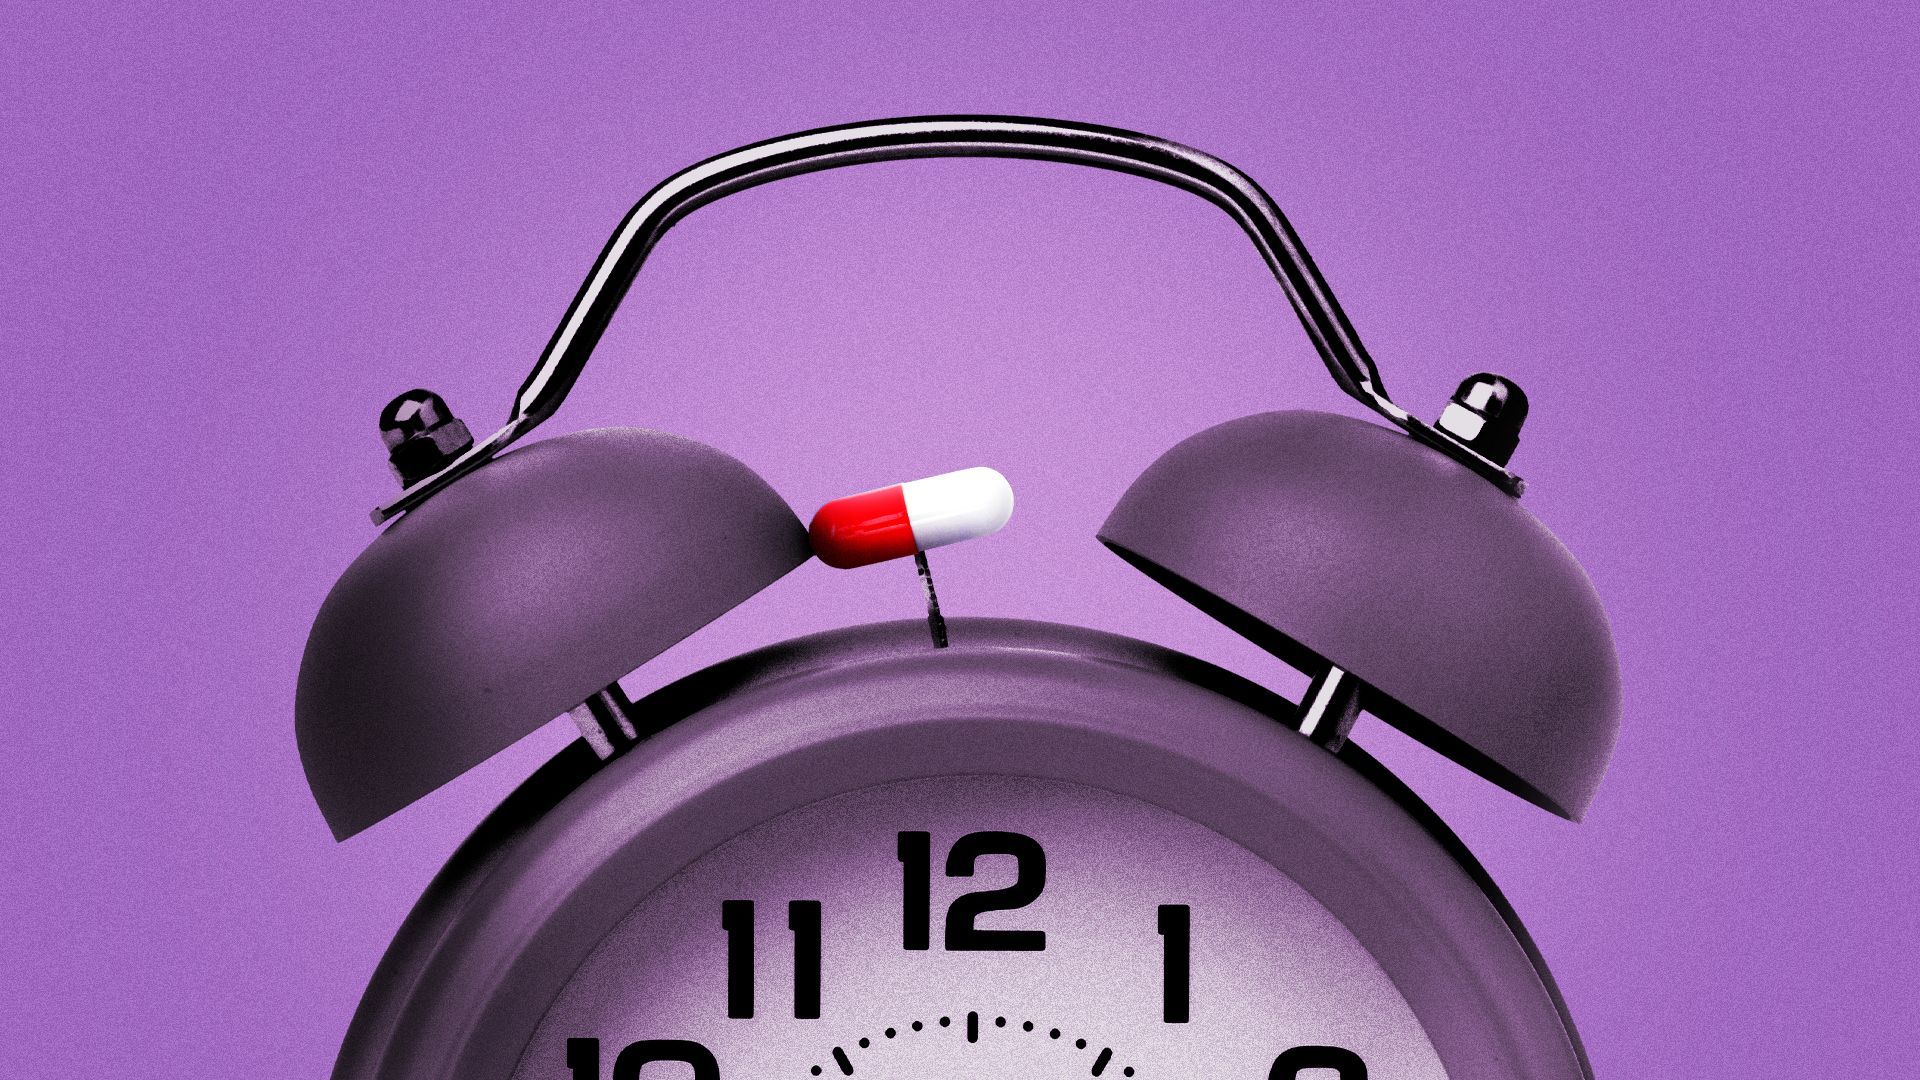 Illustration of a pill capsule as the bell hammer on an alarm clock.